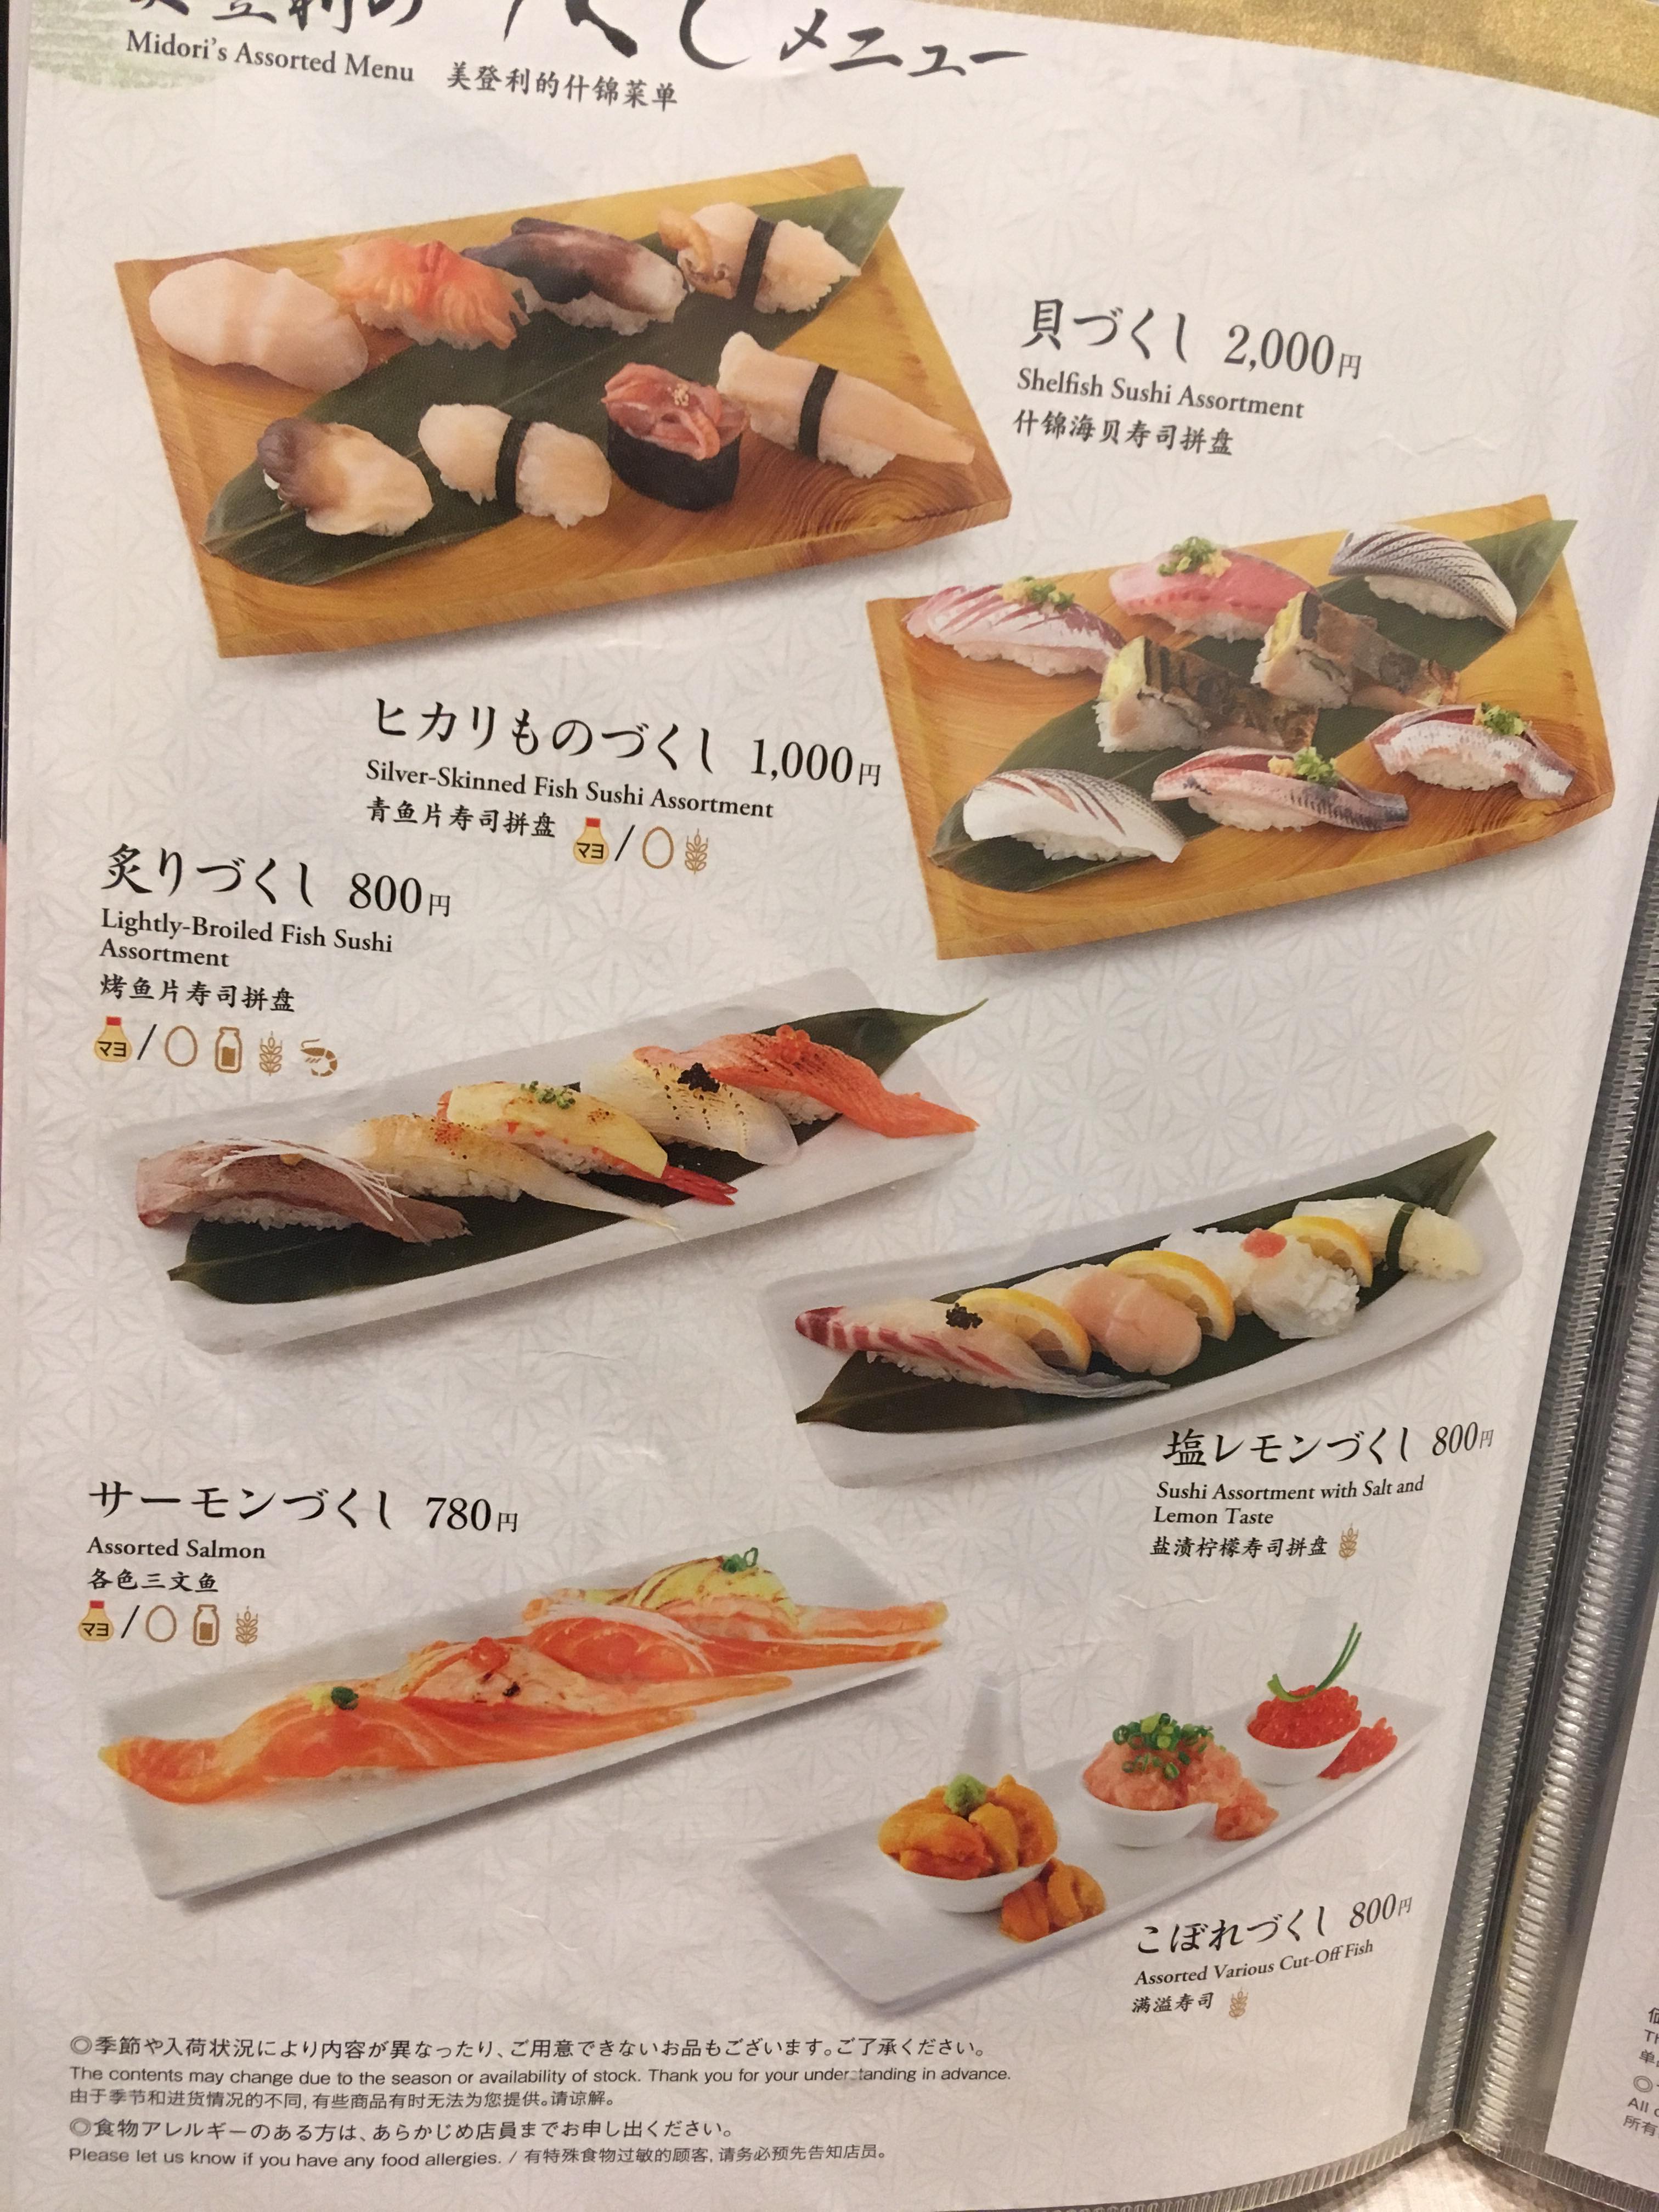 Sushi no Midori Menu, Photo by Obsessed with Japan